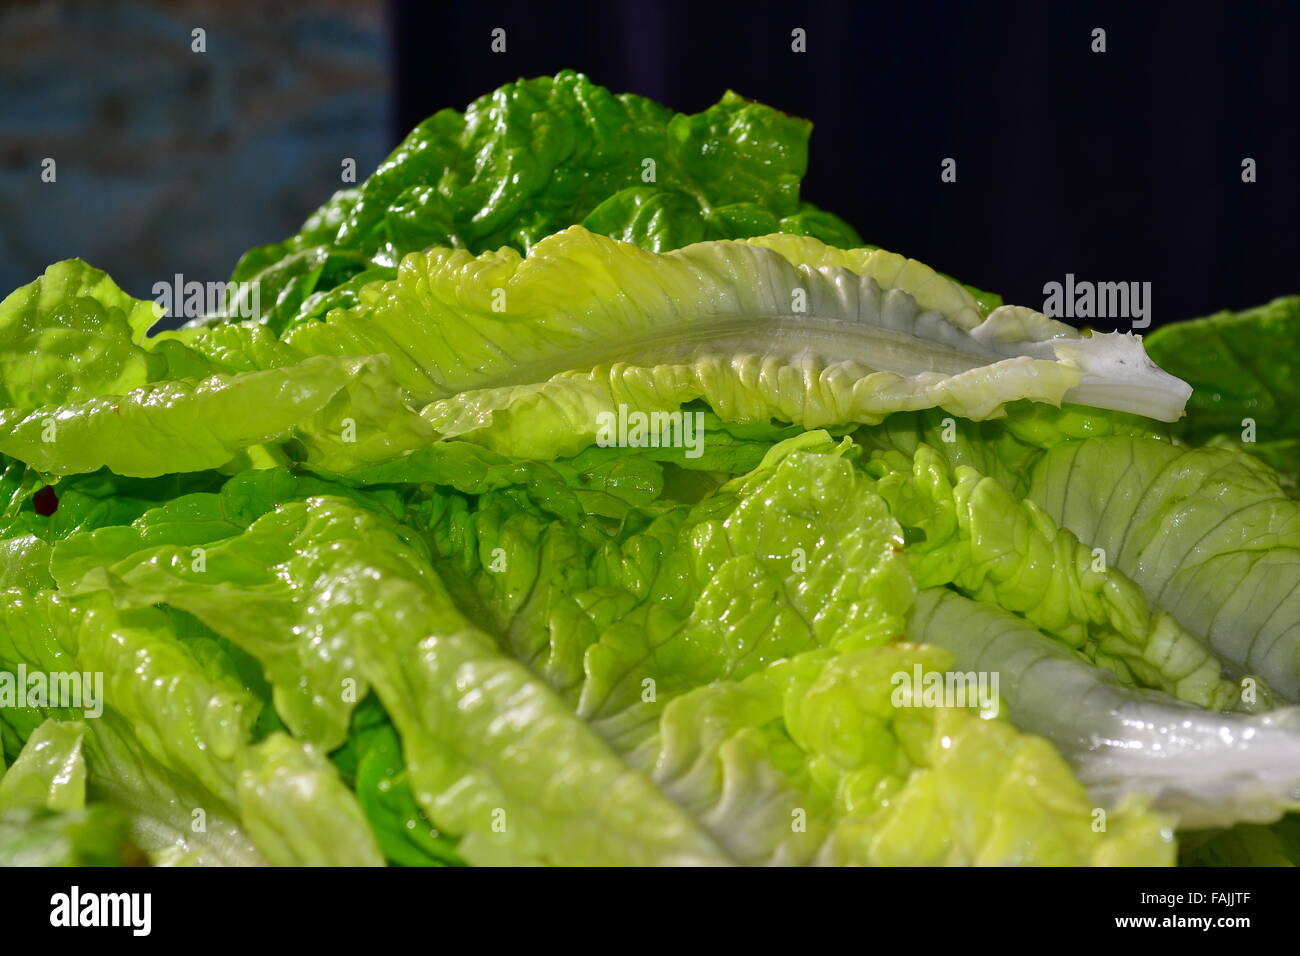 fresh lettuce being prepared for salad Stock Photo